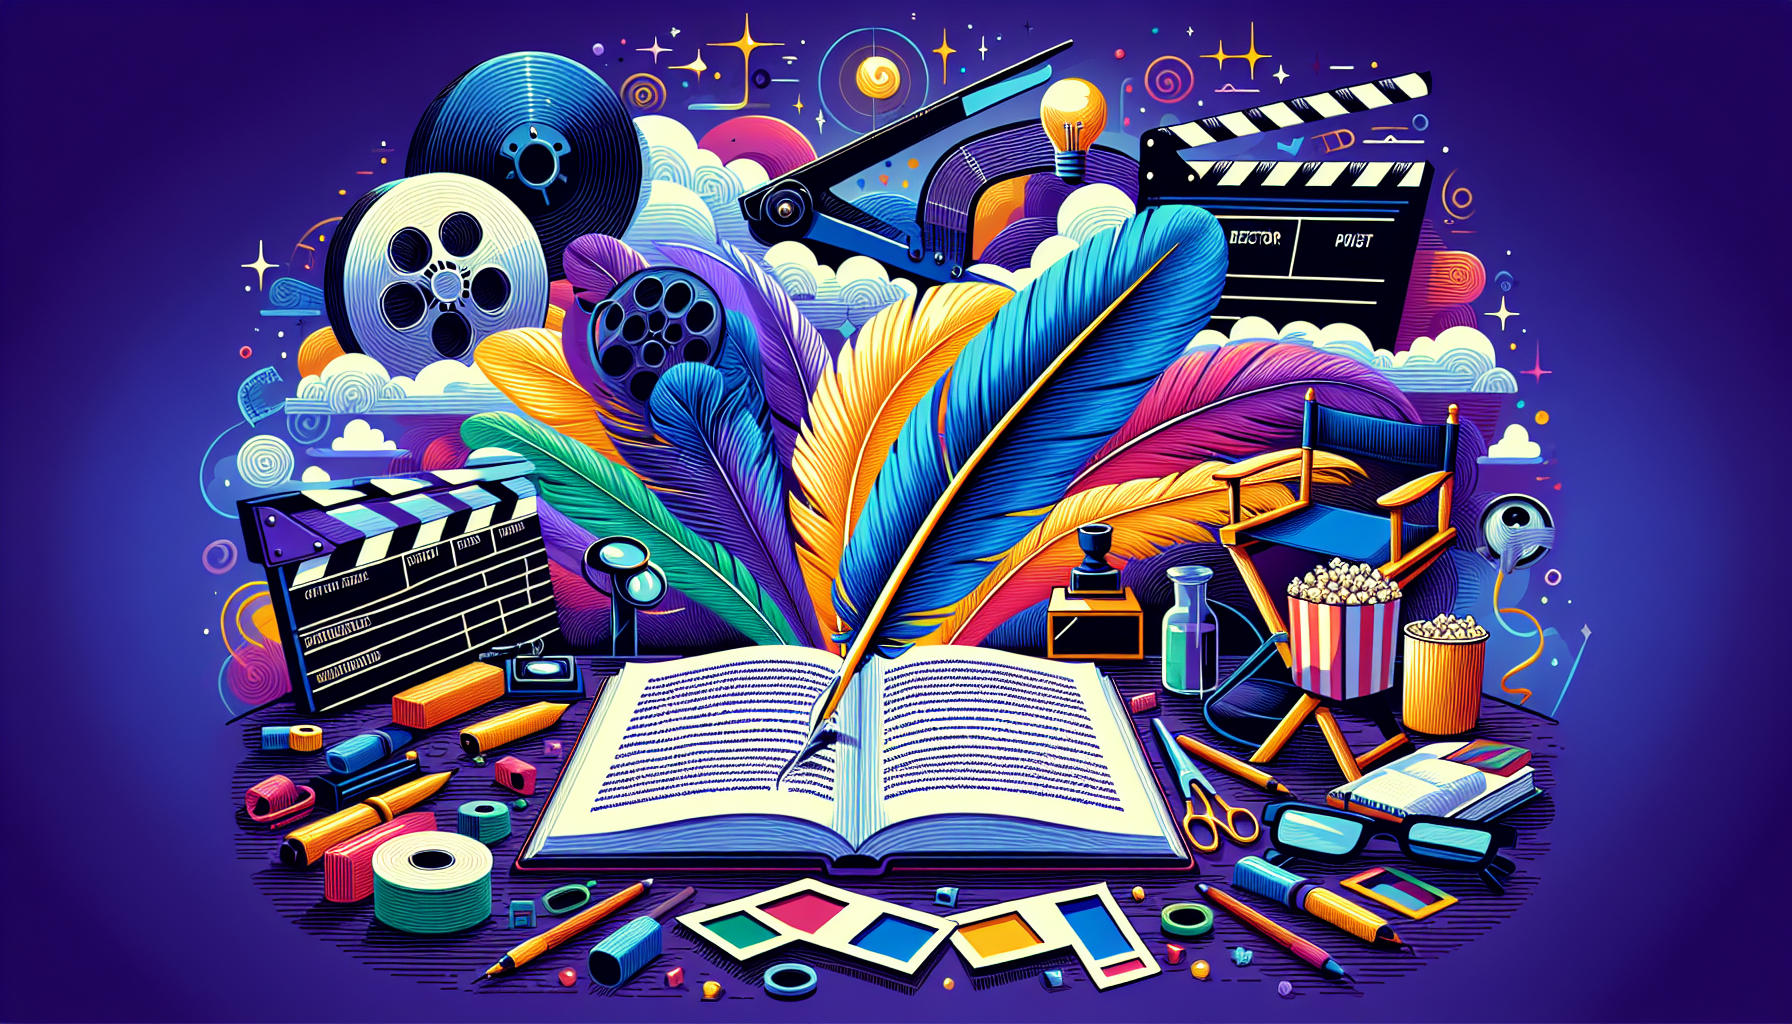 Illustration that adopts a modern and colorful aesthetic, interpreting the concept of crafting a captivating screenplay. Picture a desk scene with an open script, a feather quill poised above it. To provide context, feature various filmmaking tools like a clapperboard, a director's chair, and a film roll. A popcorn bucket and 3D glasses could gesture to the magic of movie viewing. Add an open book titled 'Essential Tips' on one corner. The scene could be bathed in colors of inspiration: rich blues, striking purples, illuminating yellows.